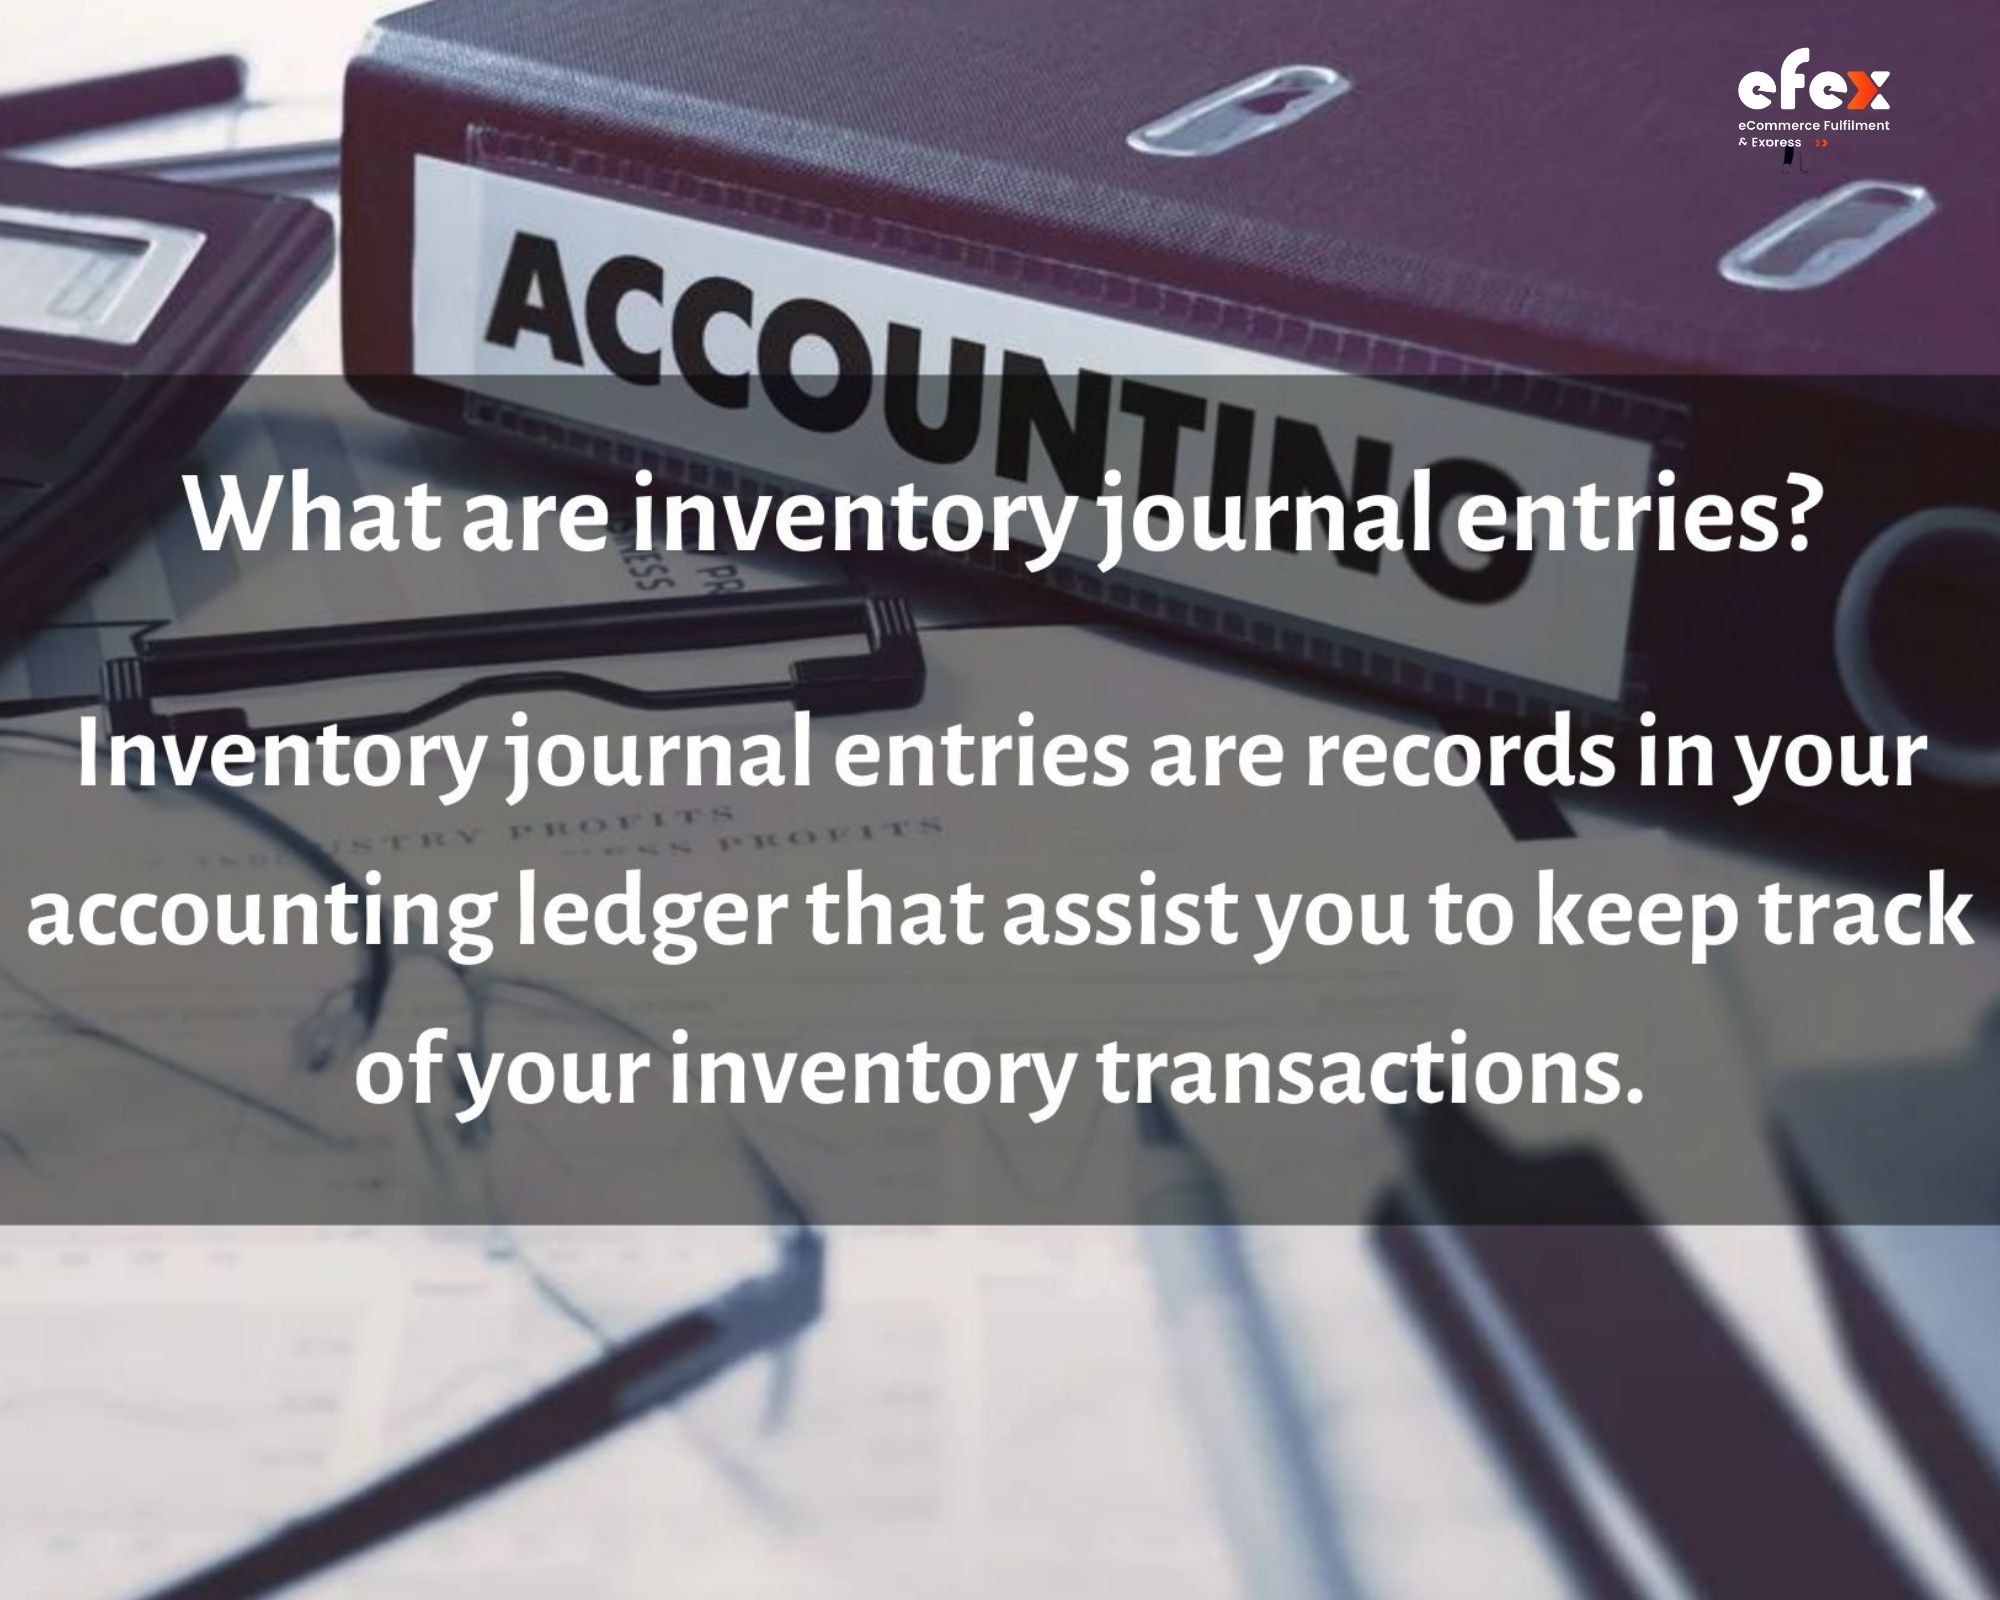 What are inventory journal entries